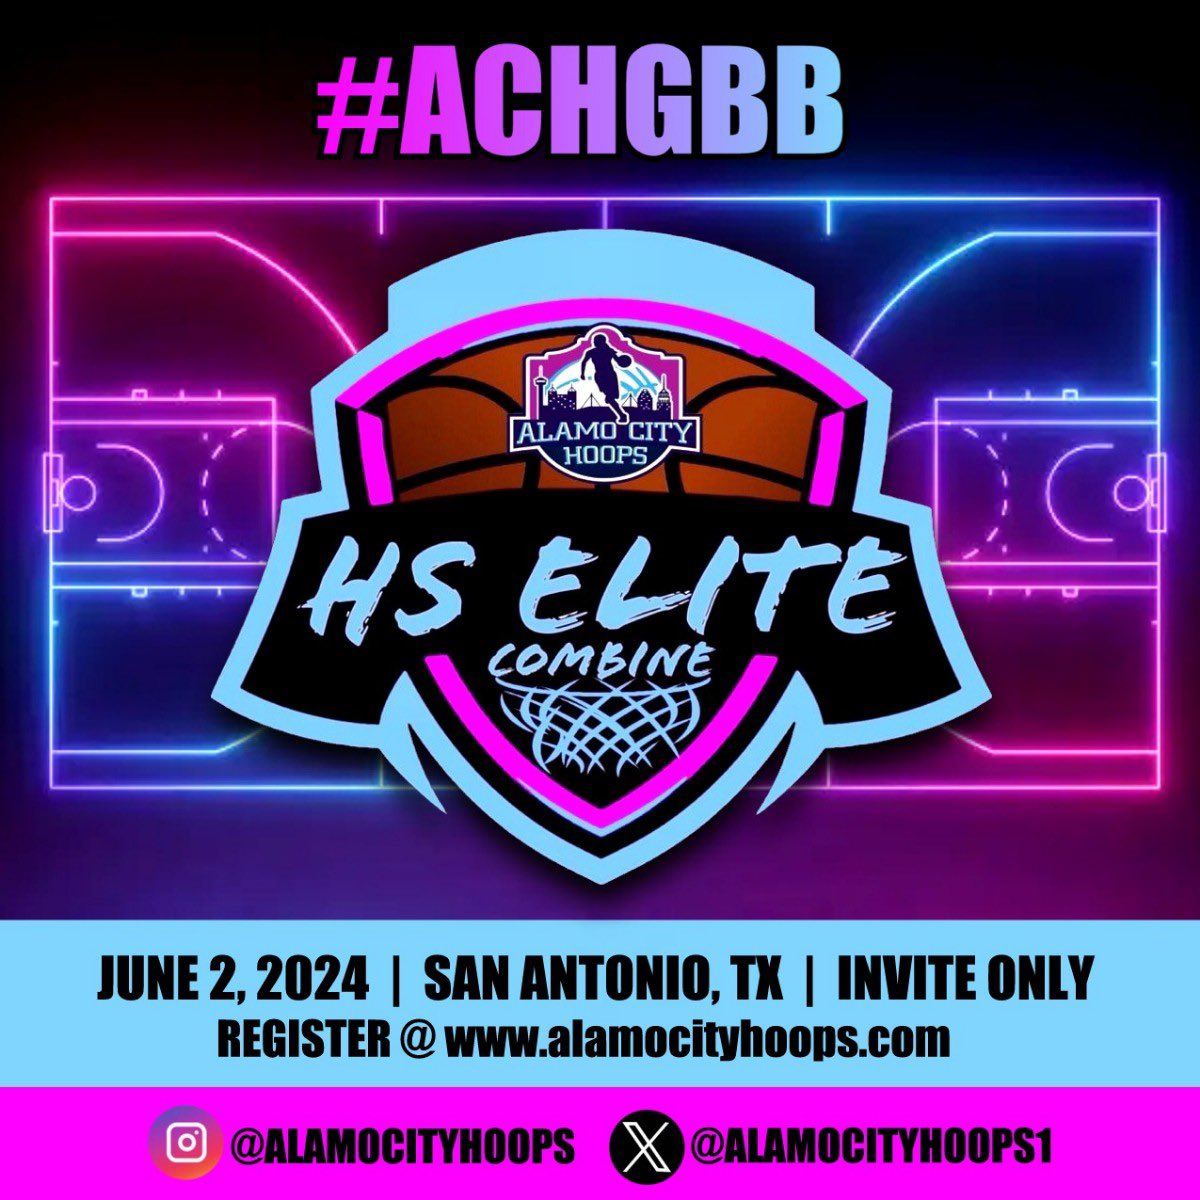 🚨Girls HS Elite Combine🚨 (INVITE ONLY) 📢 Invites are going out! Be sure to check your X & IG DM’s for E-vites. 🔗 alamocityhoops.com/page/show/8538… Top 2026/2027 & select 2028’s Registration is open thru May 16th. 📍SAT, TX 📆 June 2 Best of the best #YouRNXT #SheCanHoop #ACHGBB